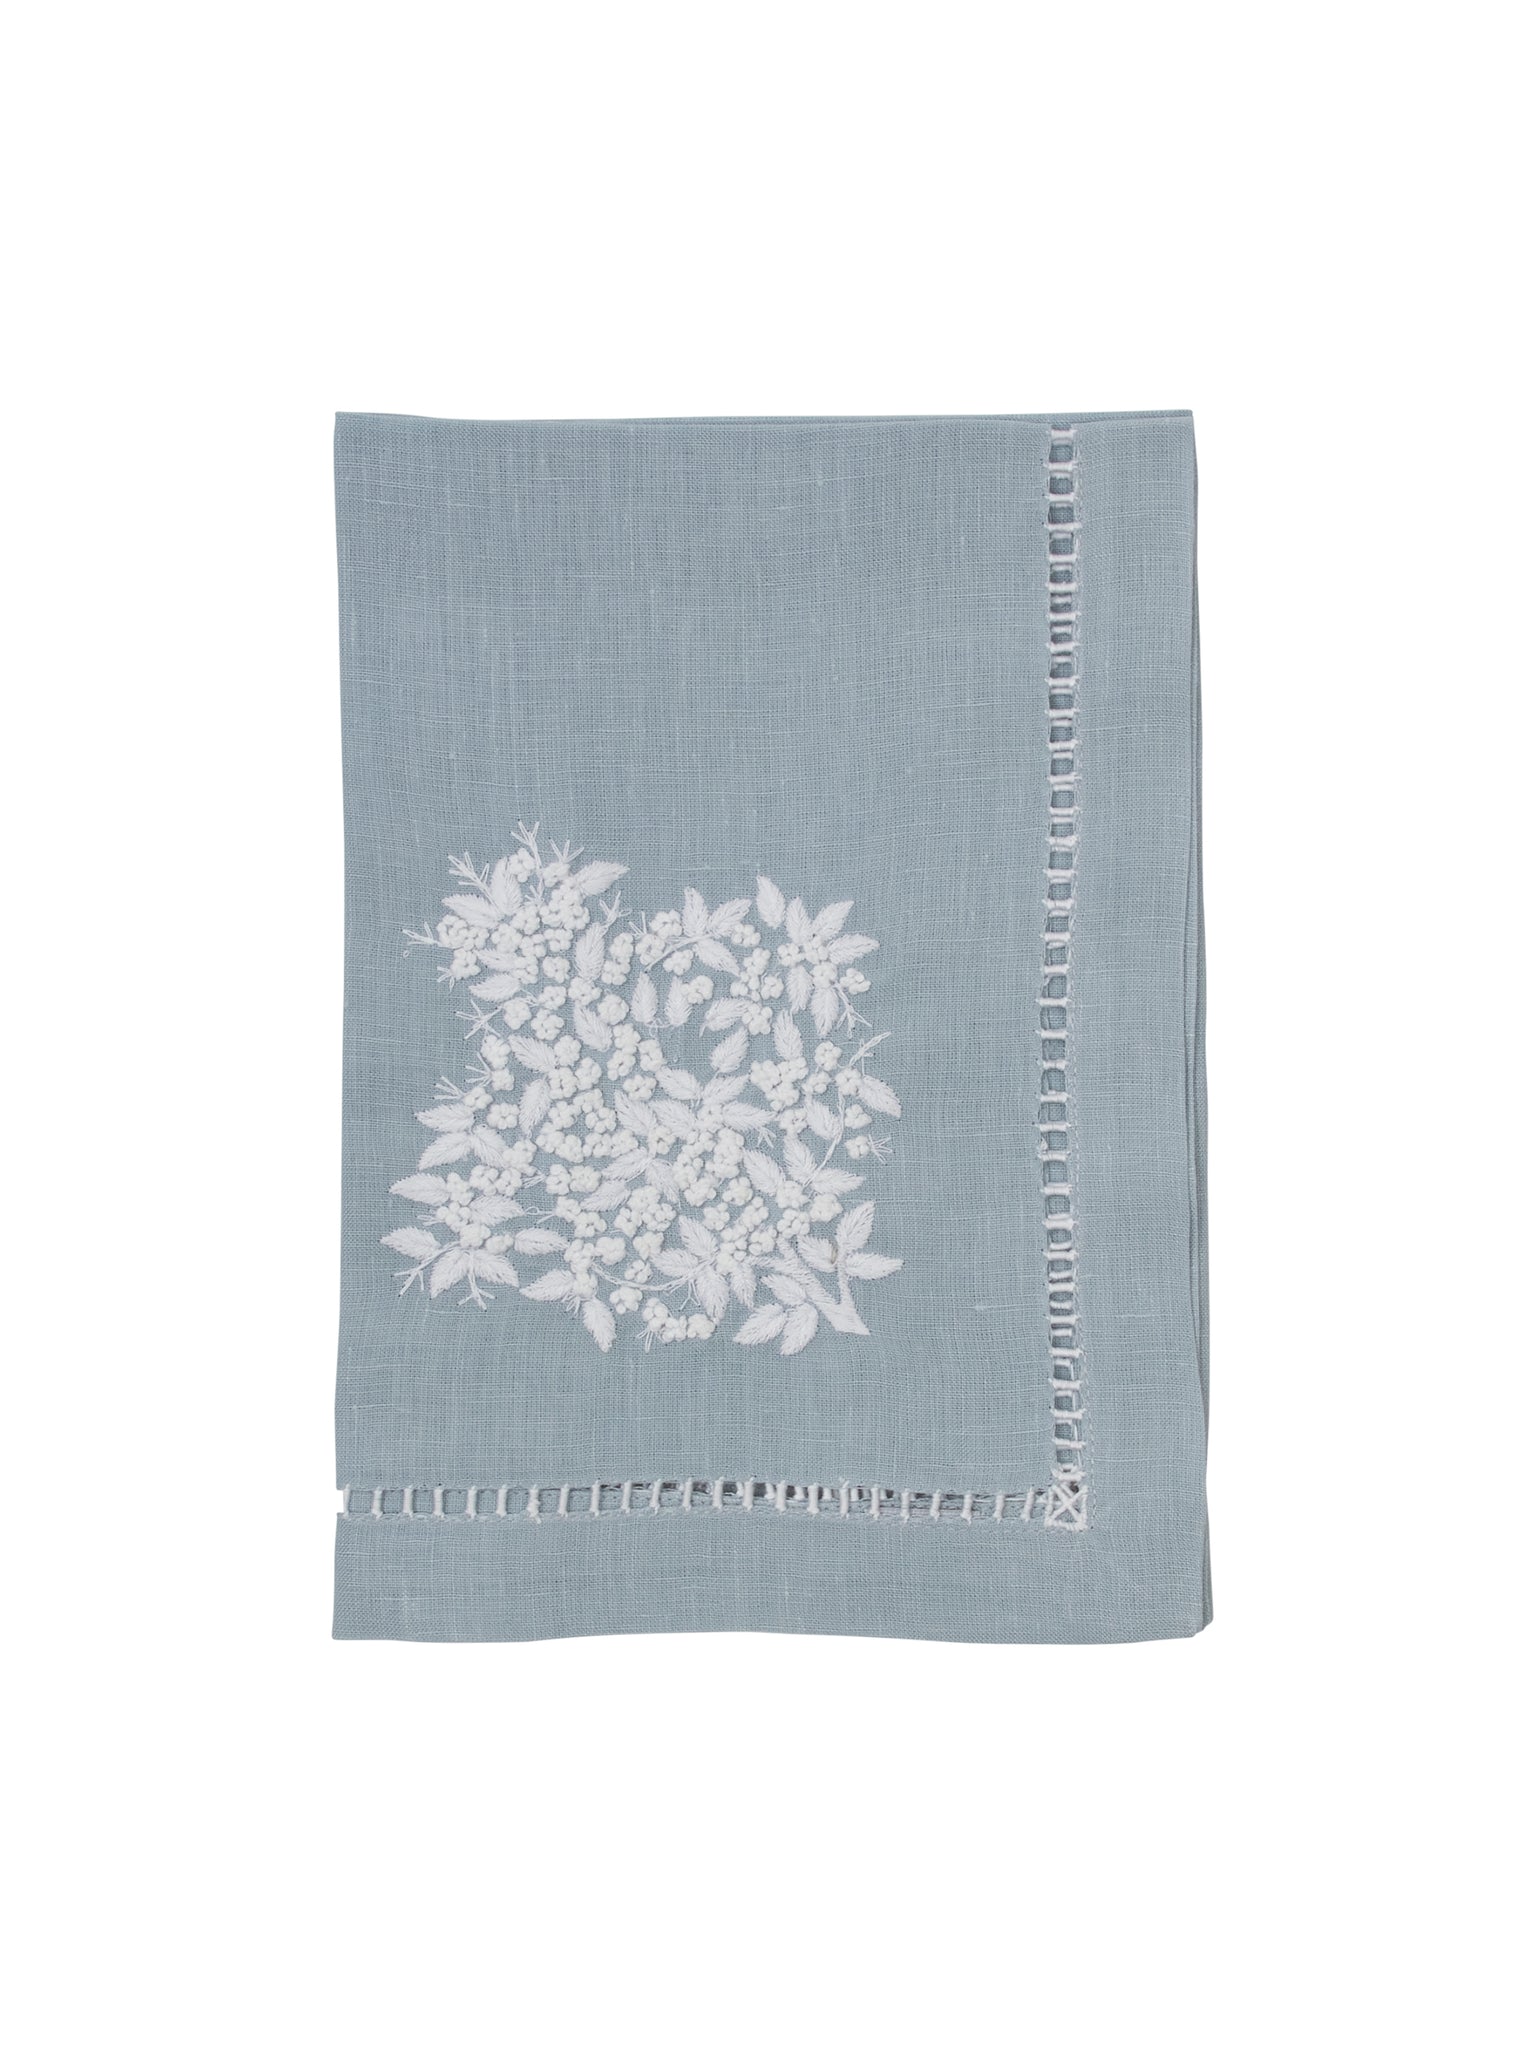 Embroidered Chambray Linen Collection Napkins Weston Table